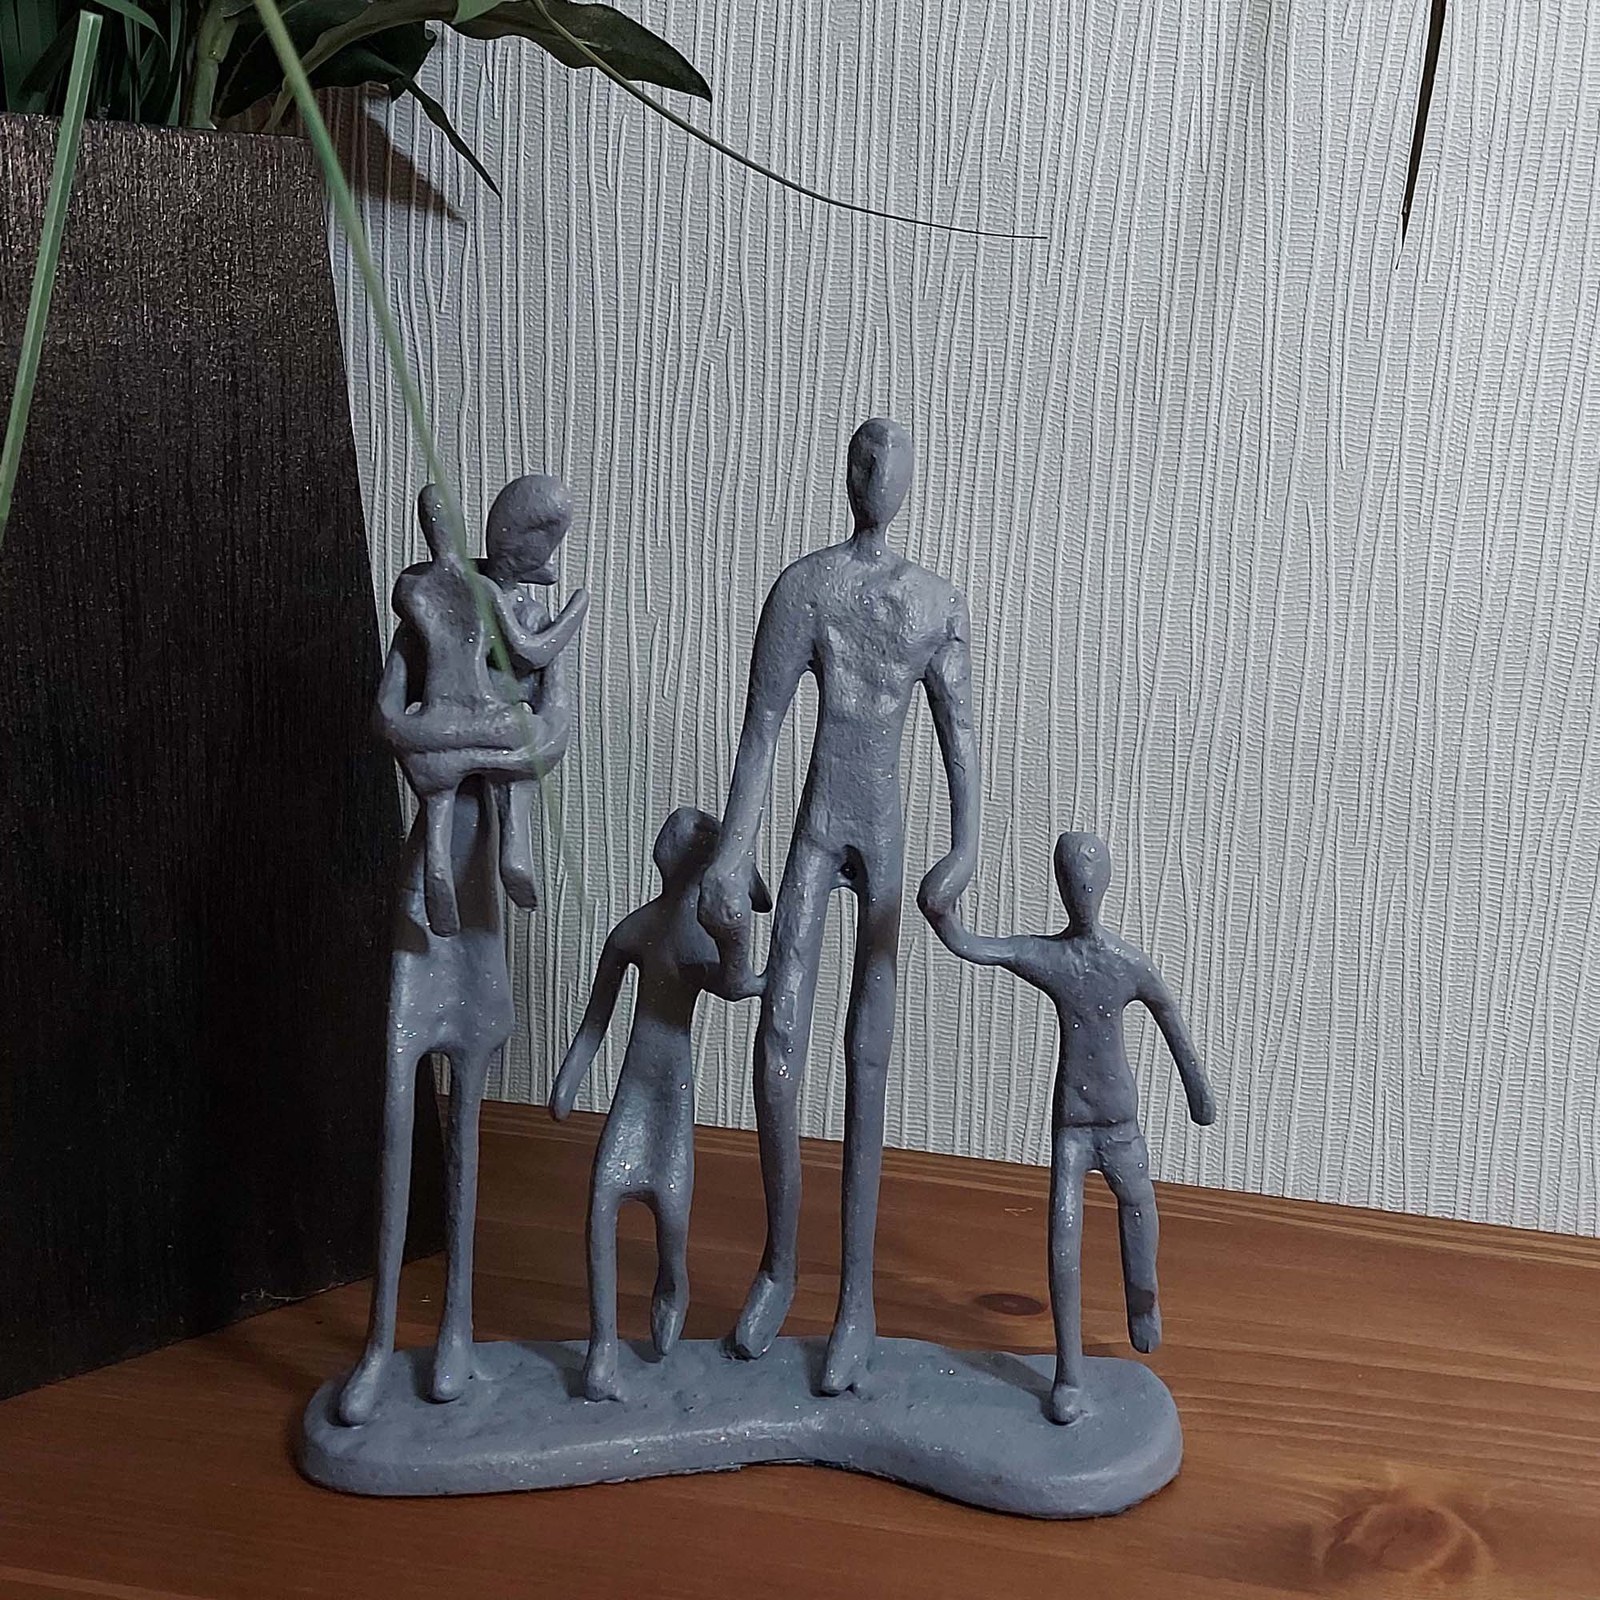 Elur Family 5 Outing Iron Figurine 18Cm Grey Shimmer Statue Statues Elur   